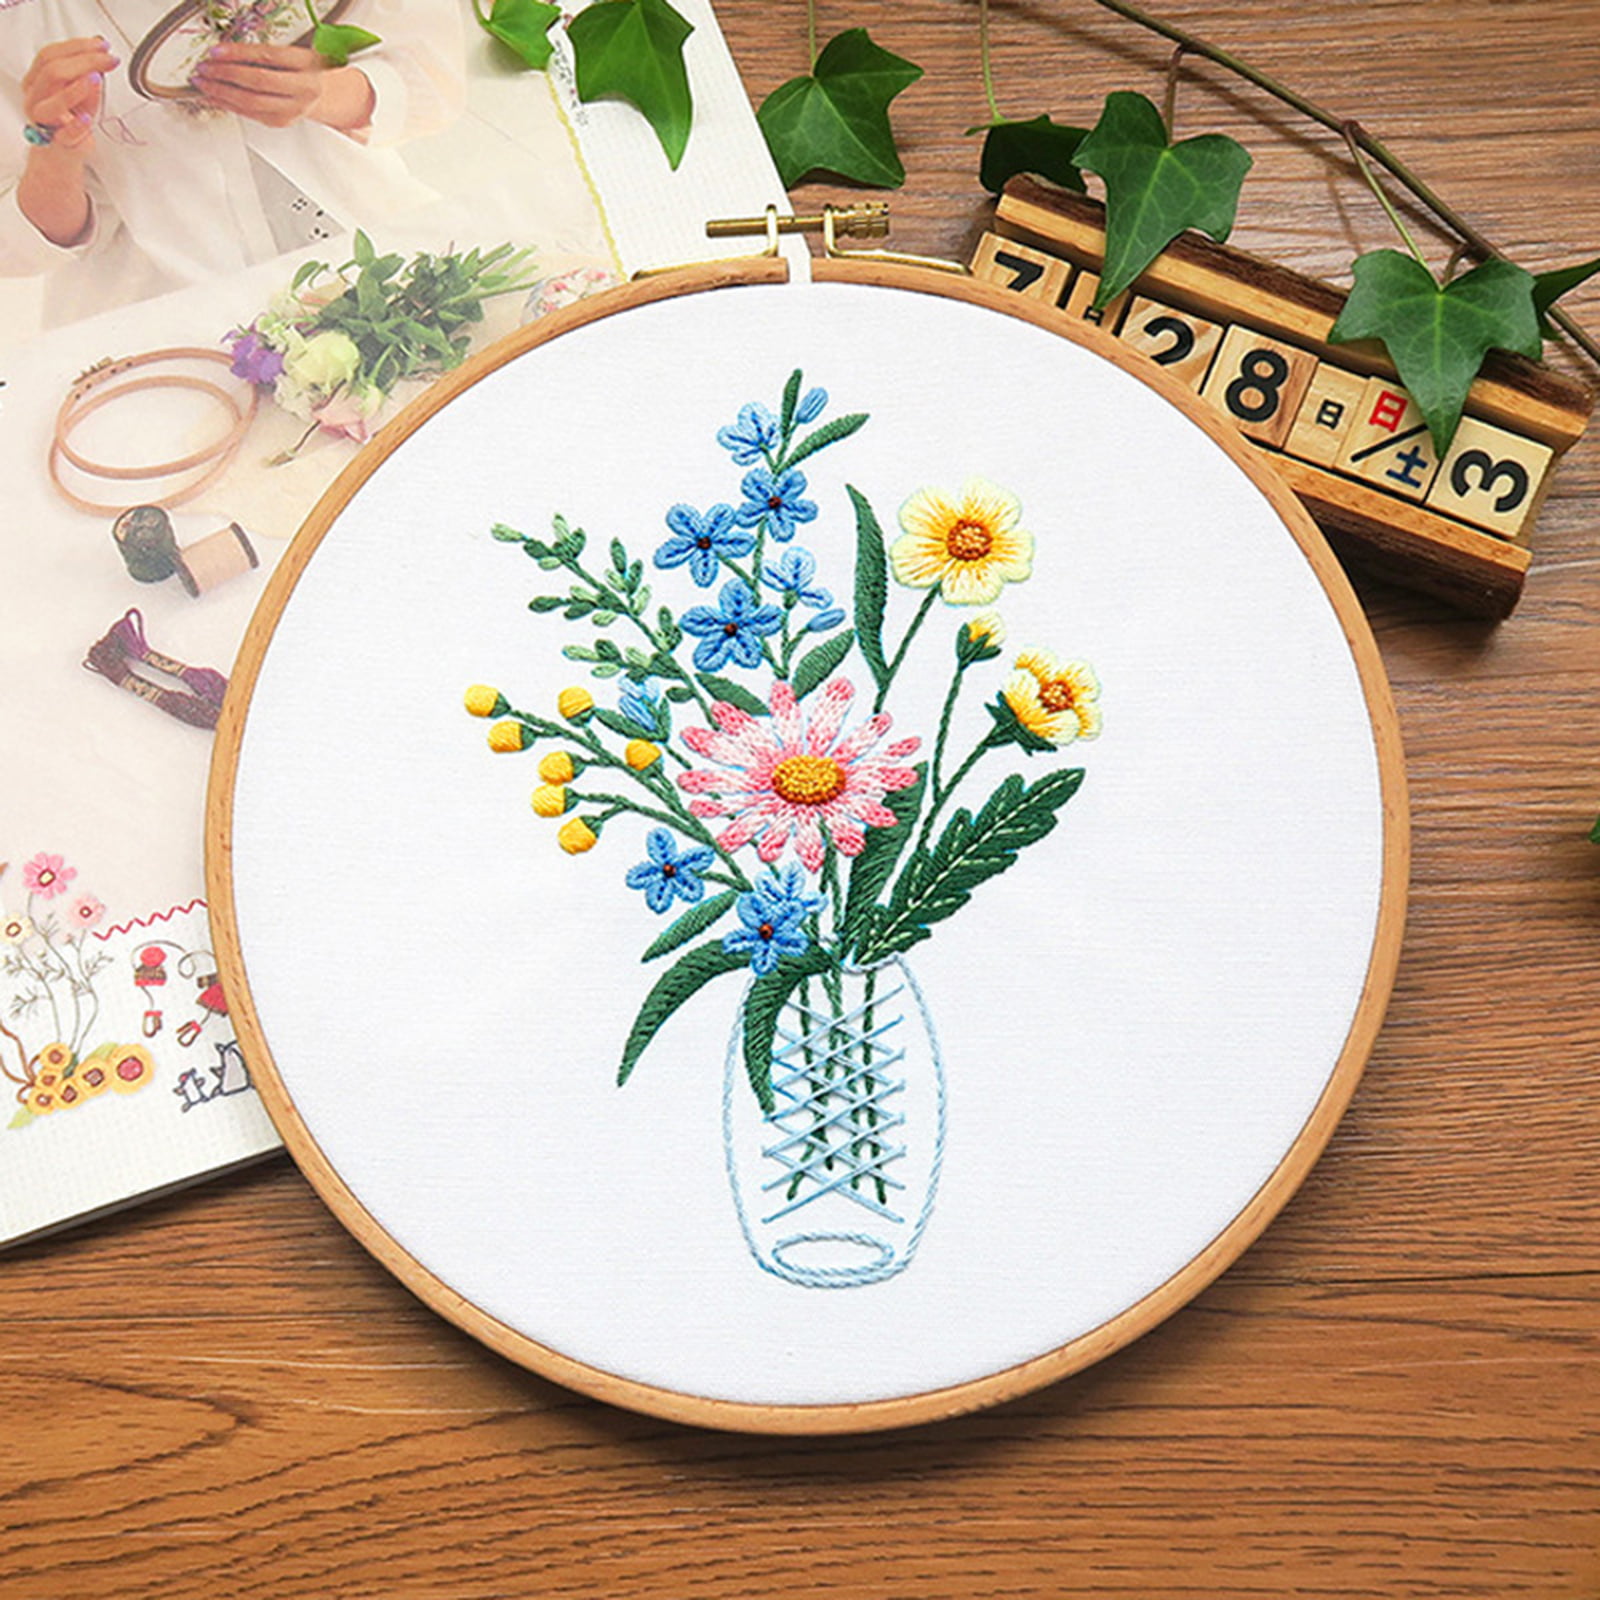 3D DIY Rose Flower Bouquet Embroidery Set with Hoop for Beginner